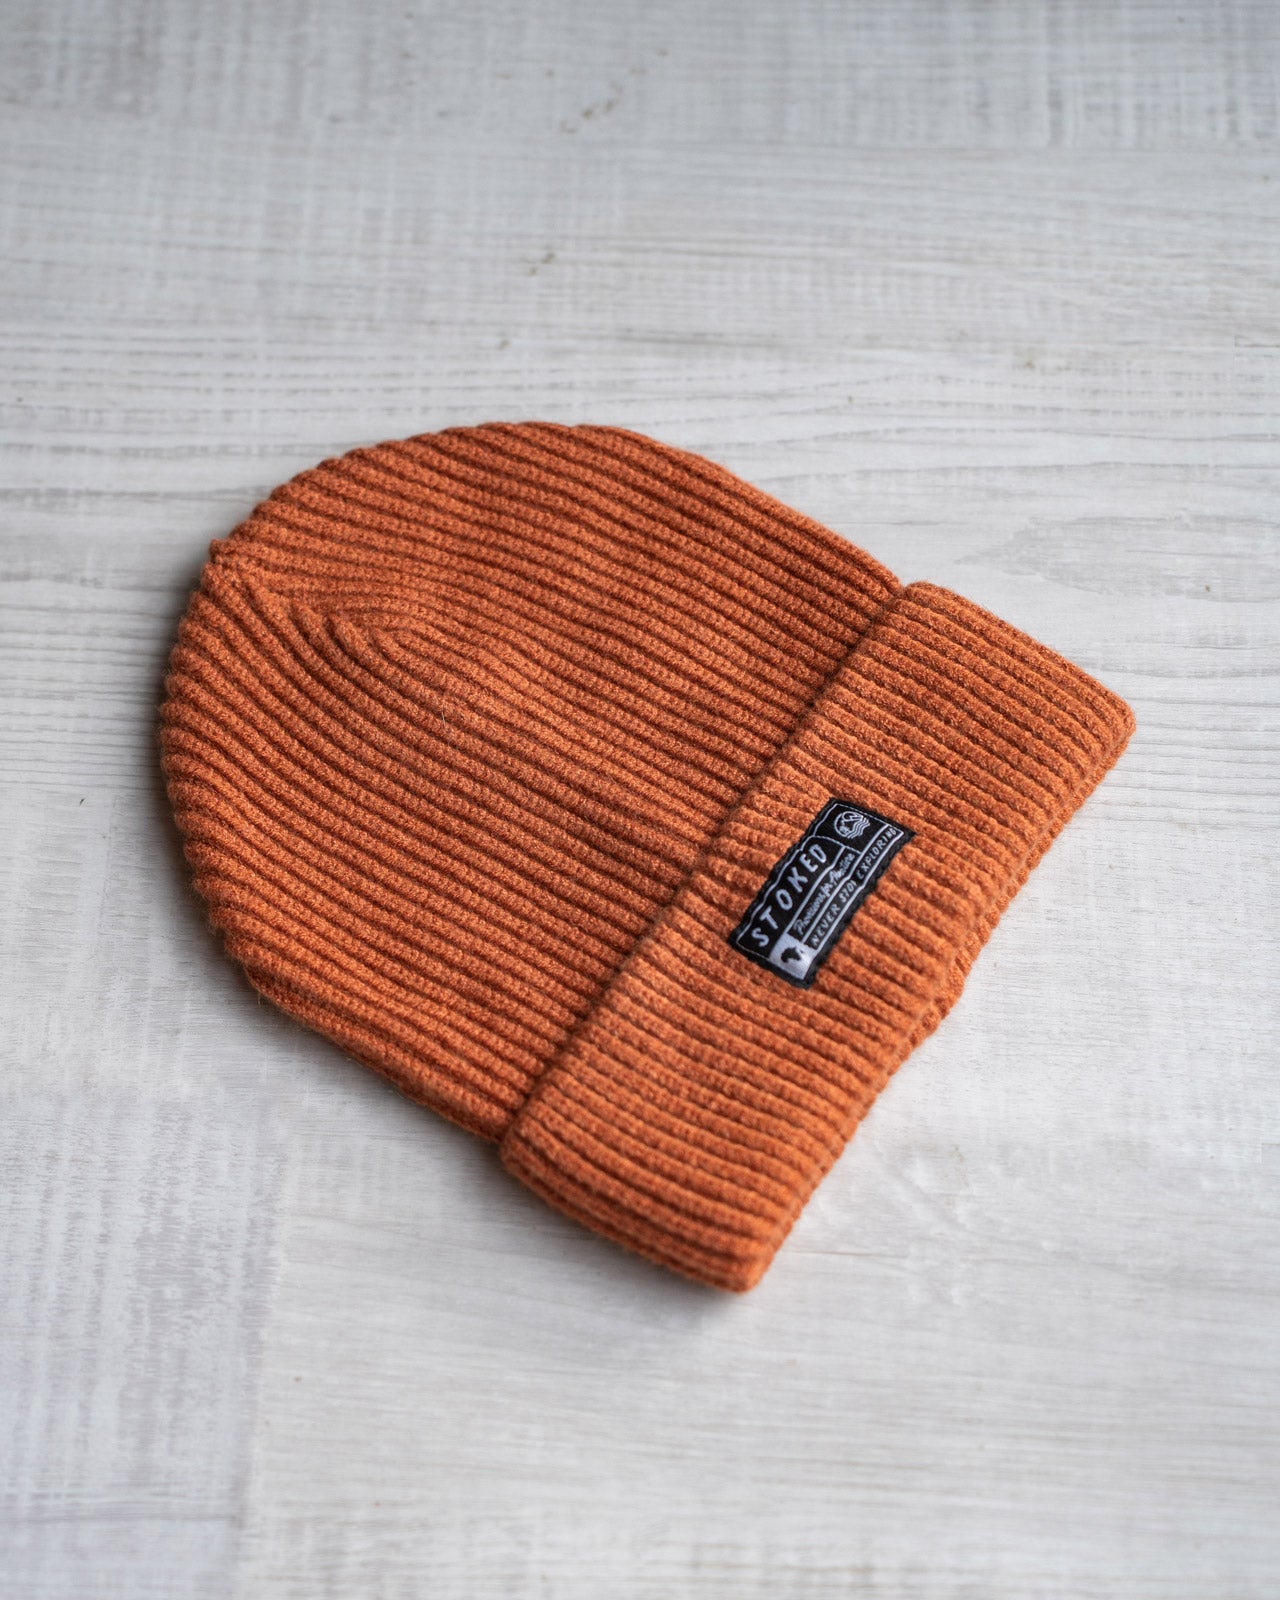 The Nomad Beanie - Dusk Orange - Stokedthebrand. Lifestyle products for outdoor adventures. Made in South Africa